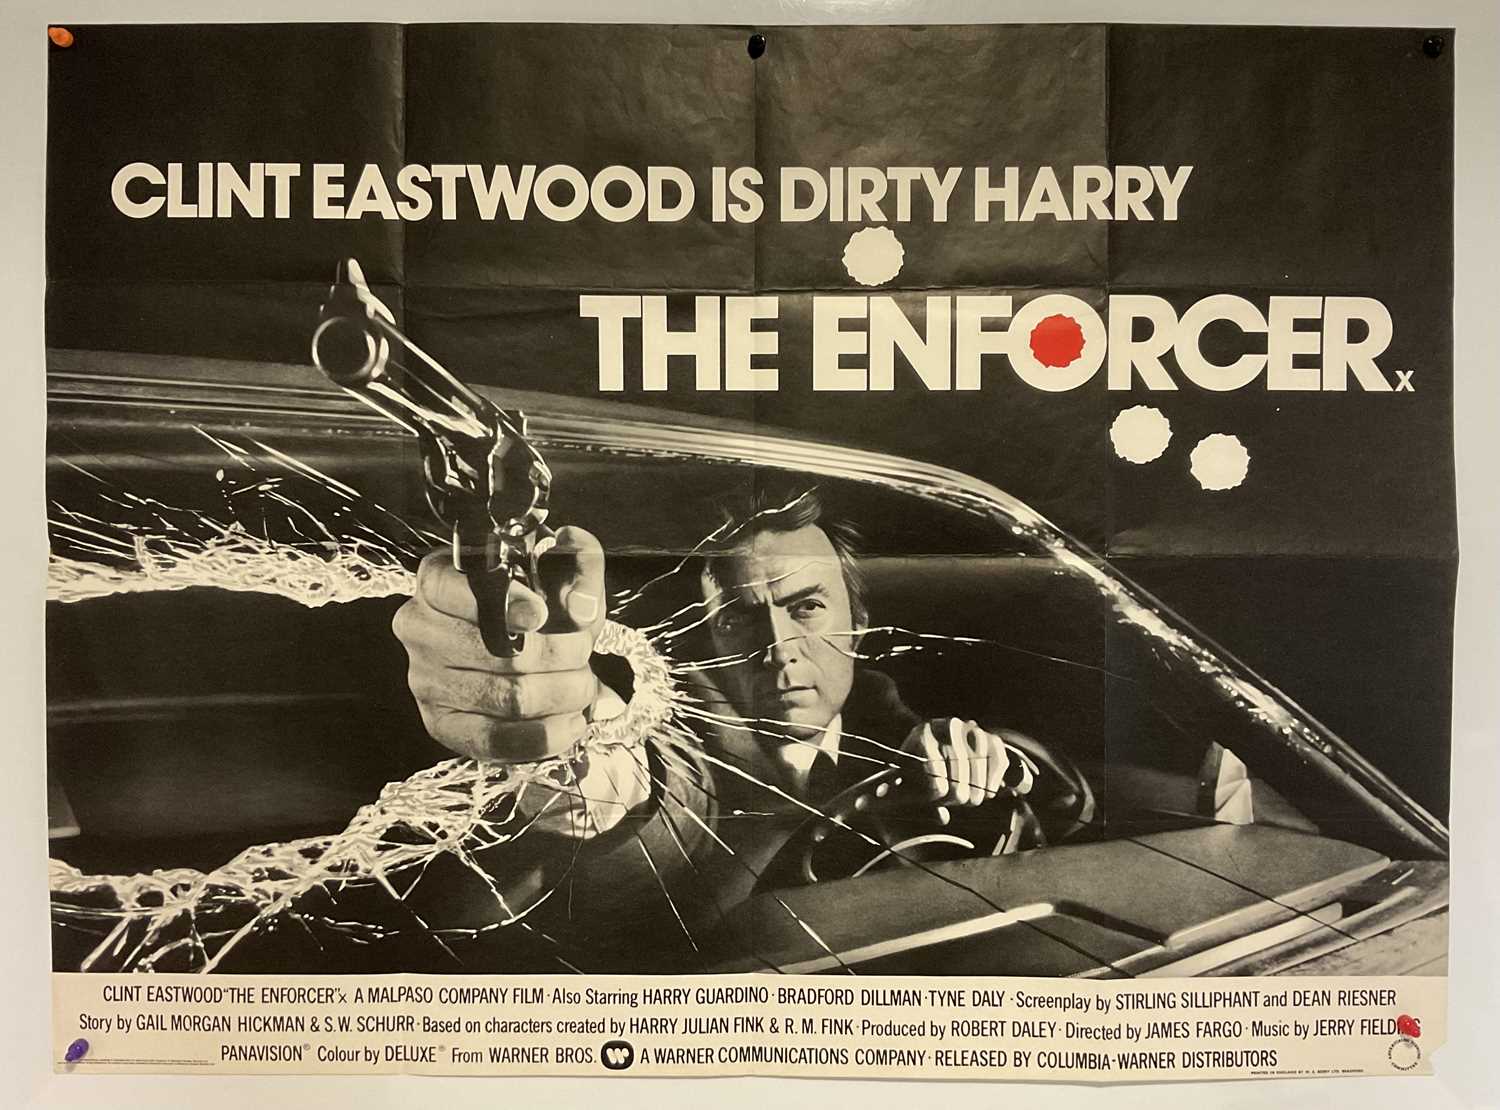 THE ENFORCER (1976) UK Quad film poster, starring Clint Eastwood, white text style artwork by Bill